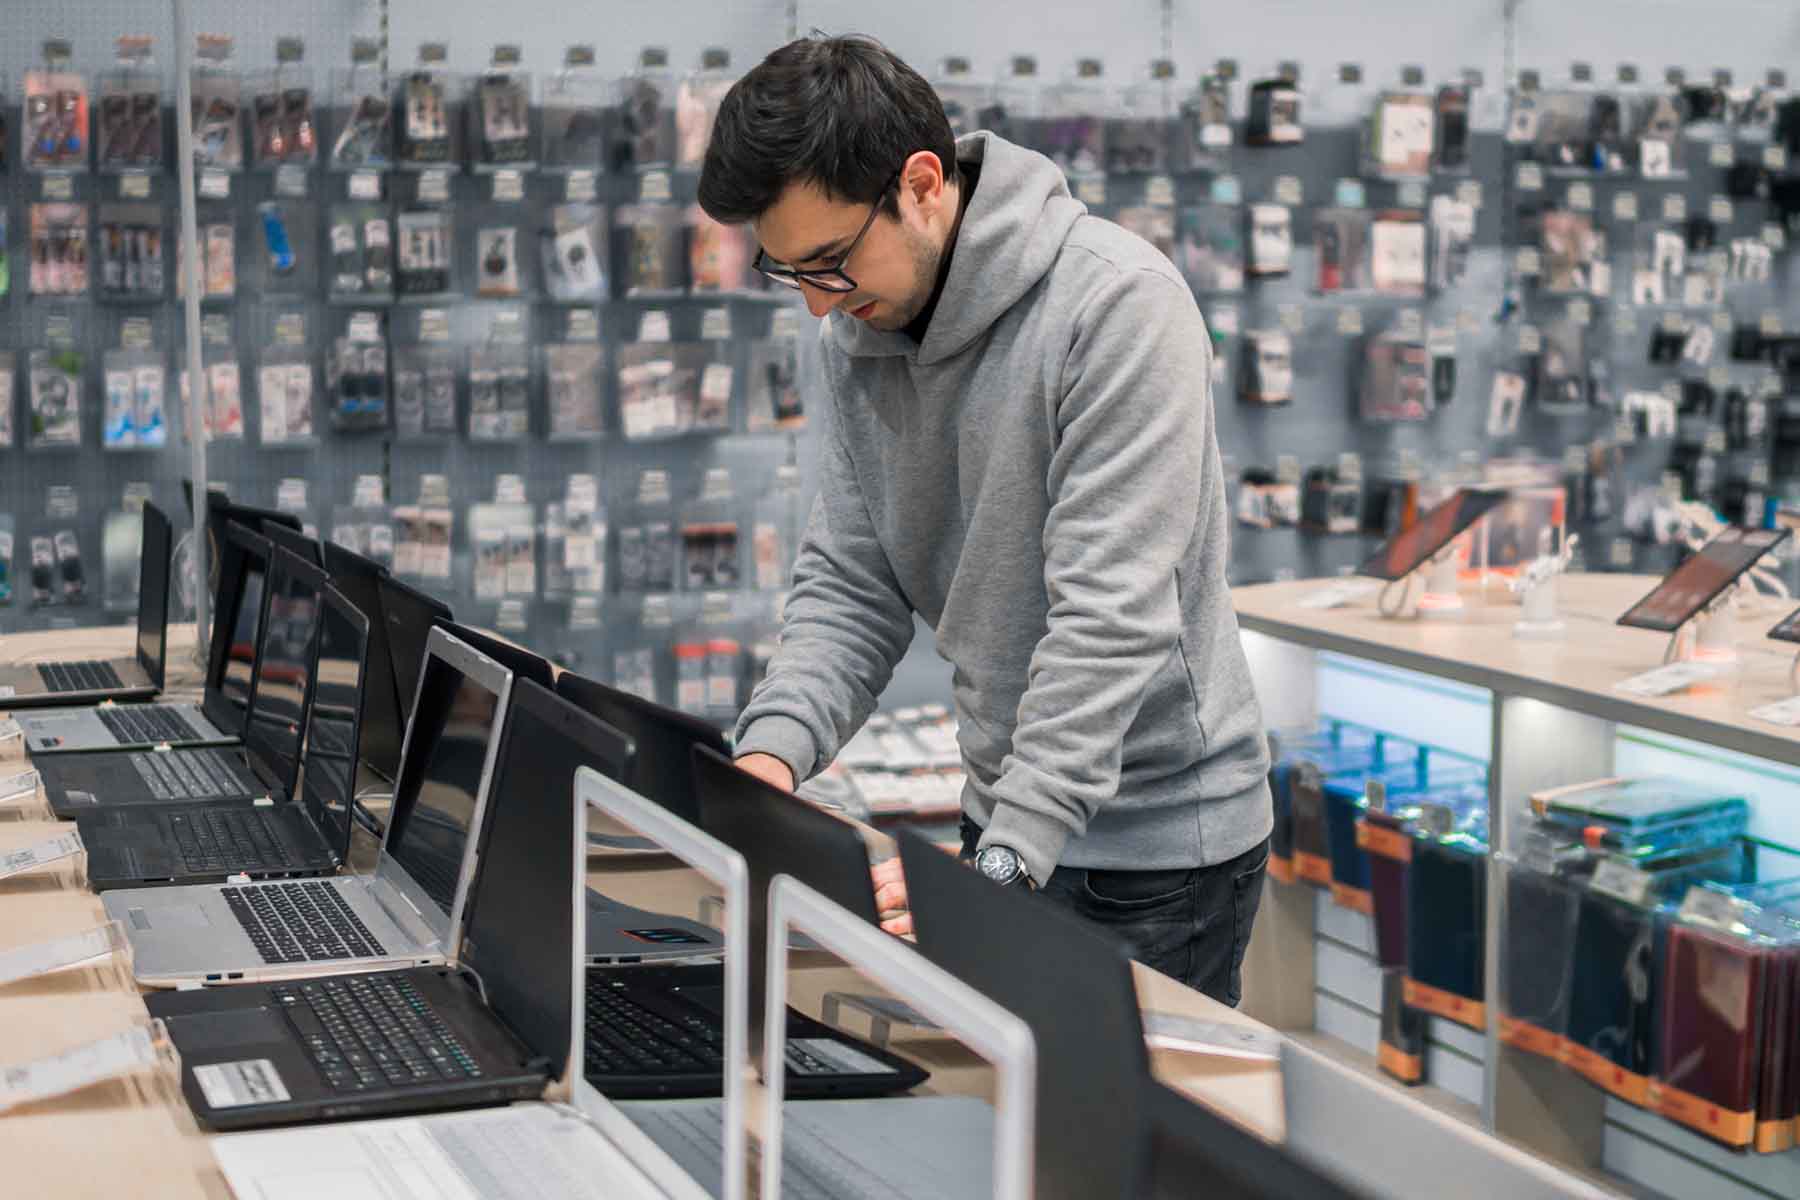 Young man in an electronics store browsing laptop computers